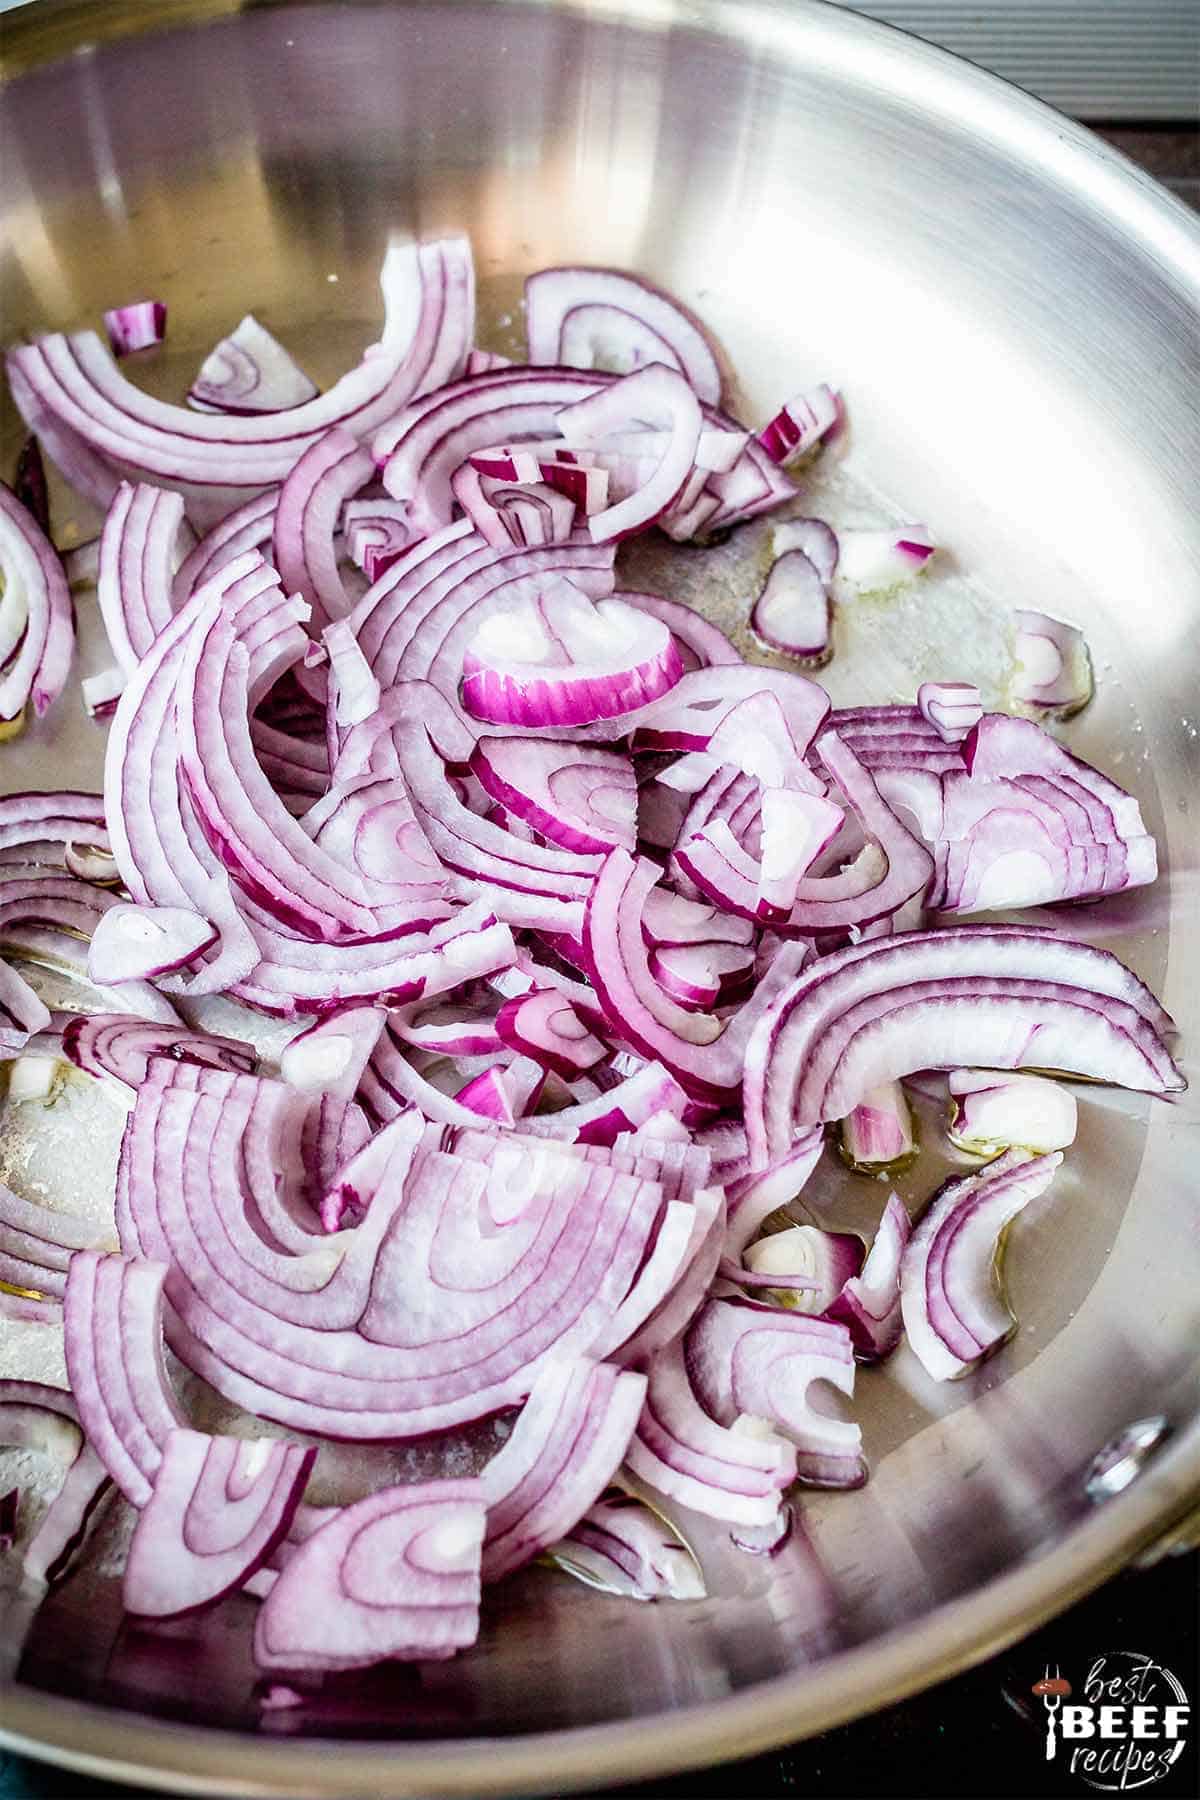 Sliced red onions in a pan